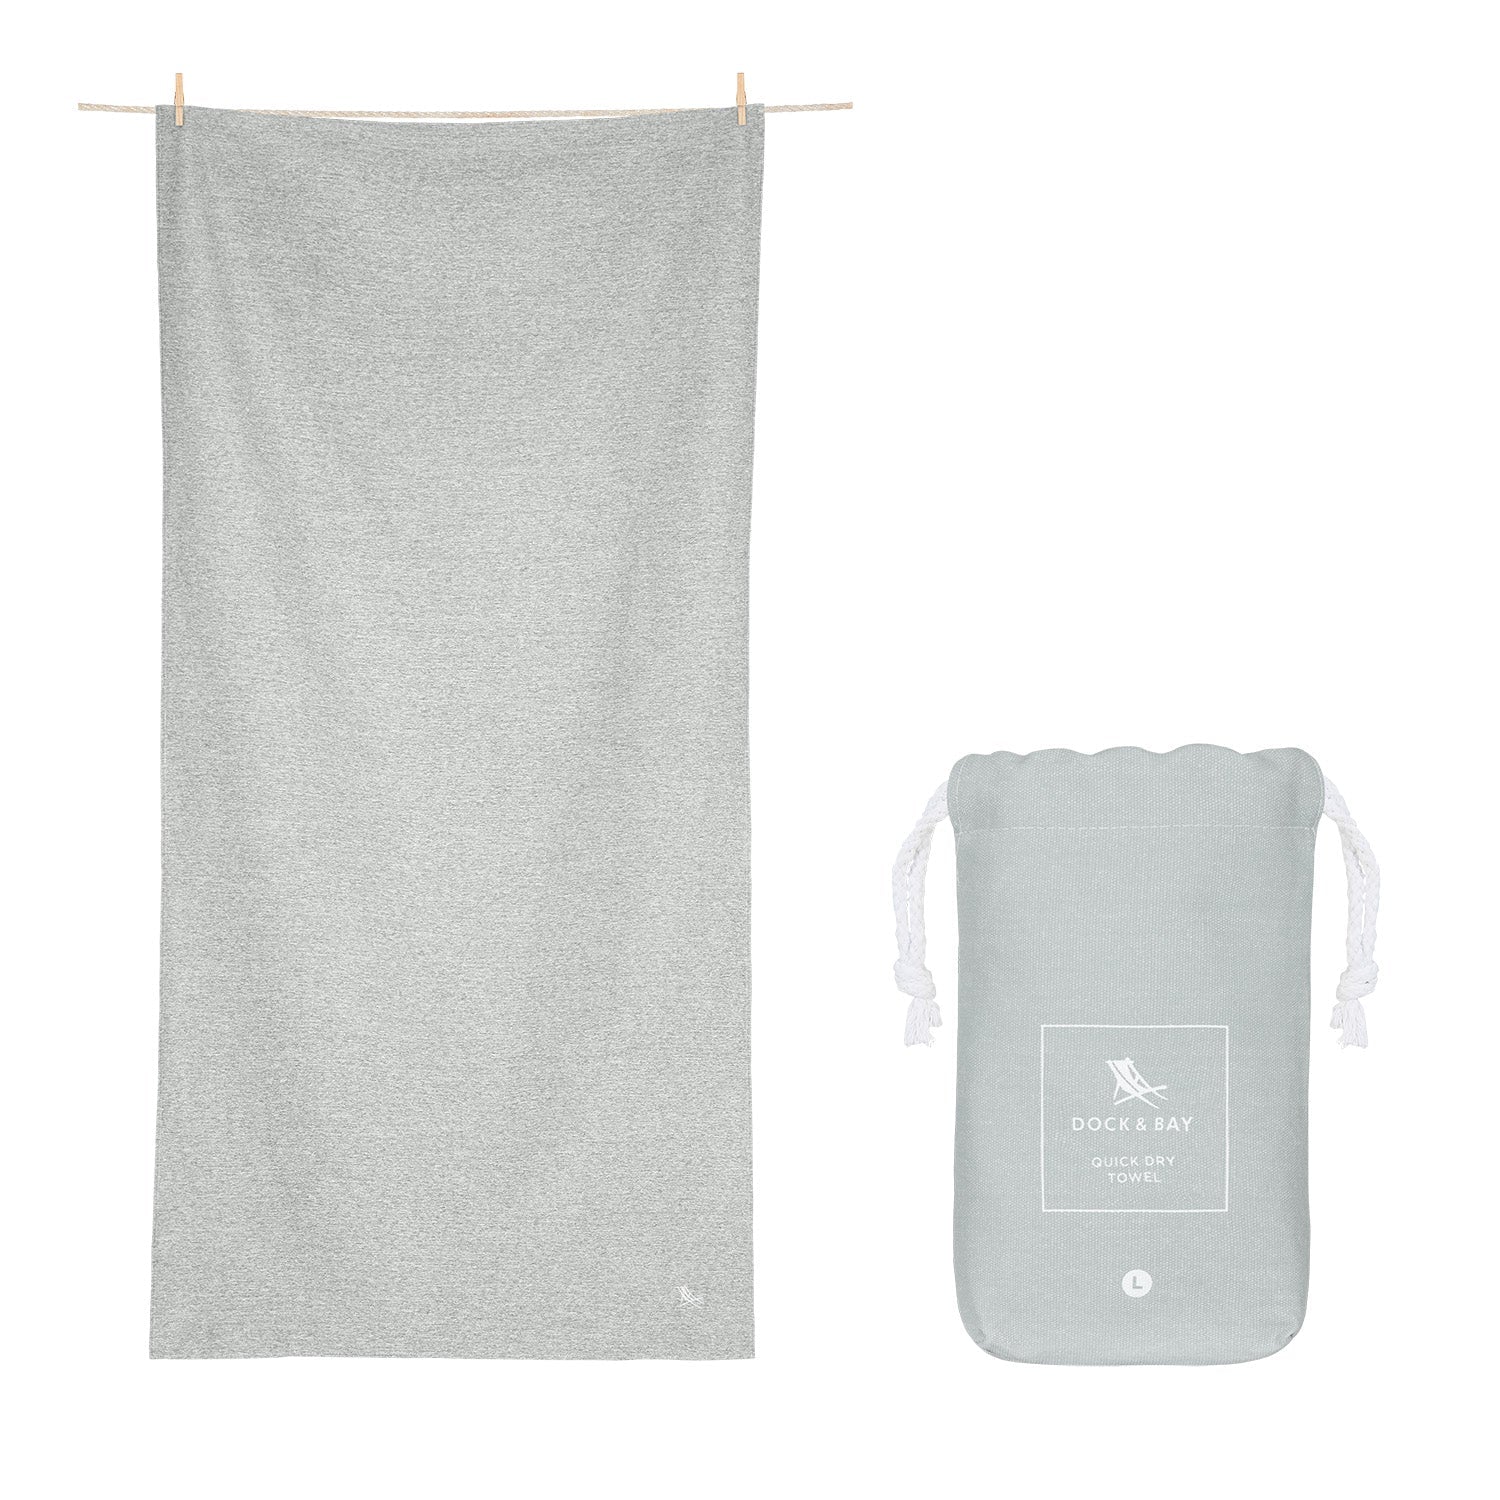 STUDIO-19-active-grey-combo-linepouch-lar_1a1f1e5a-645c-491f-9be1-69a83dc34846.jpg